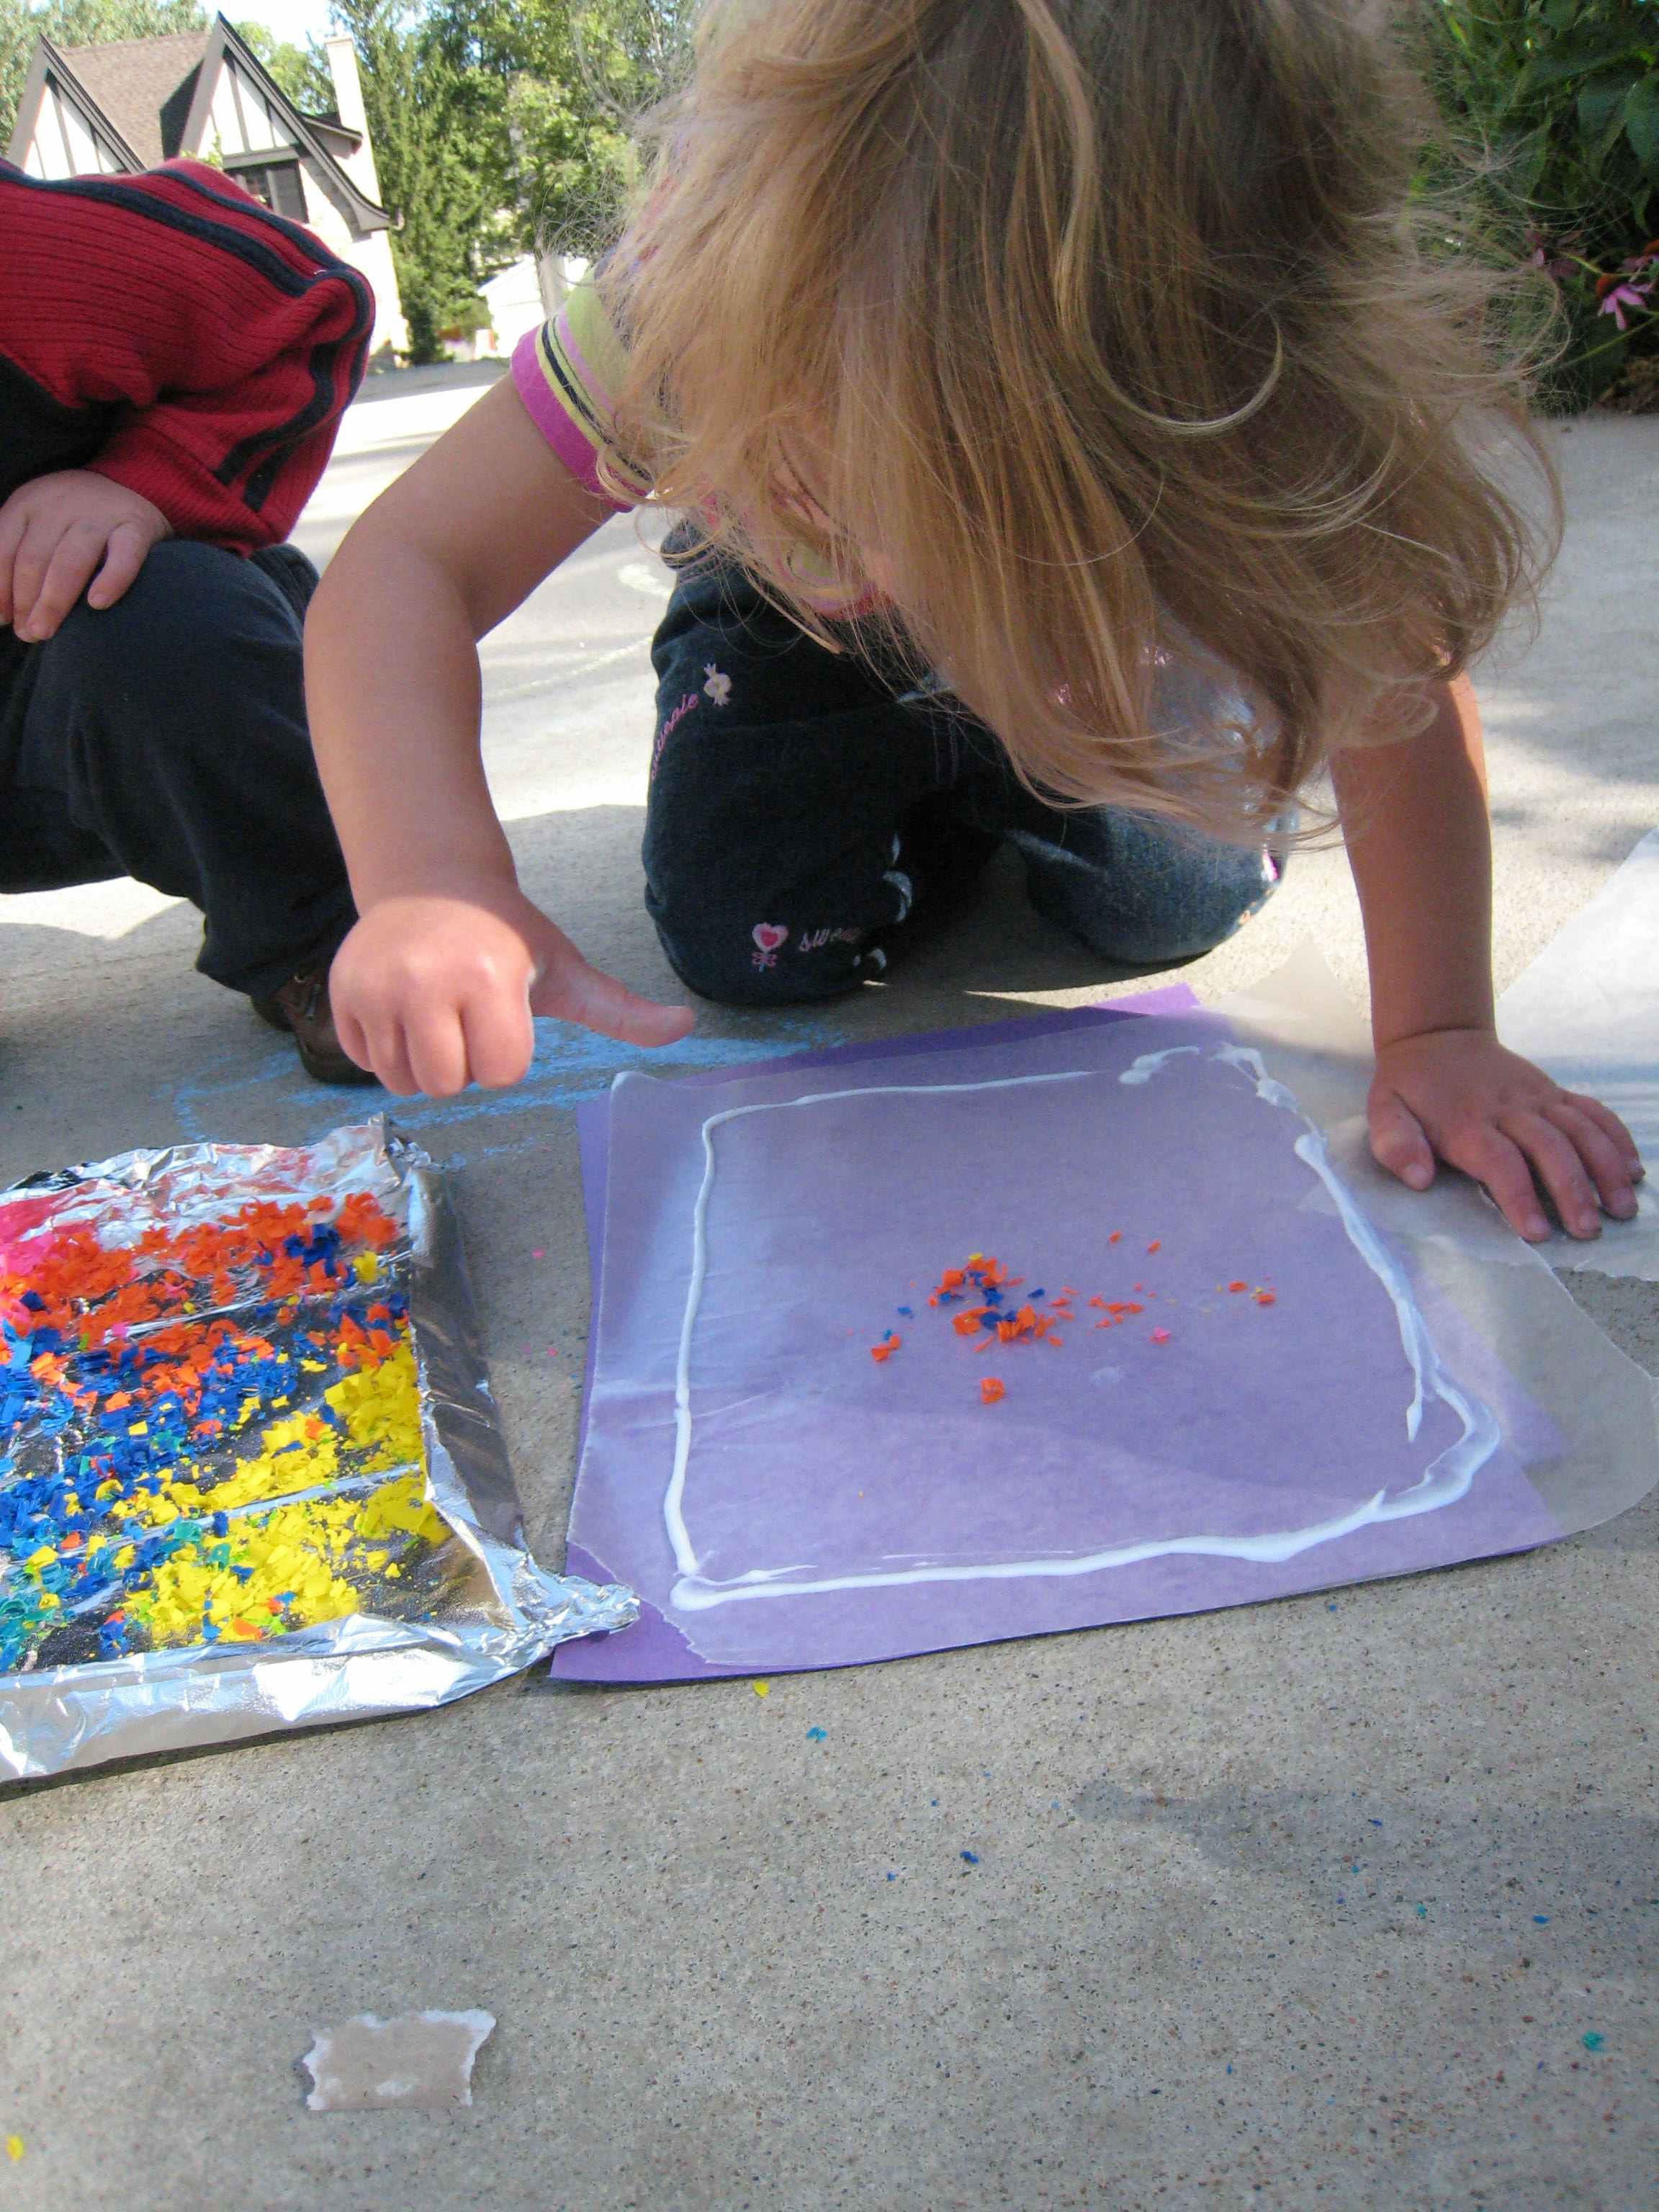 Let your kids create "stained glass" with crayons and wax paper.